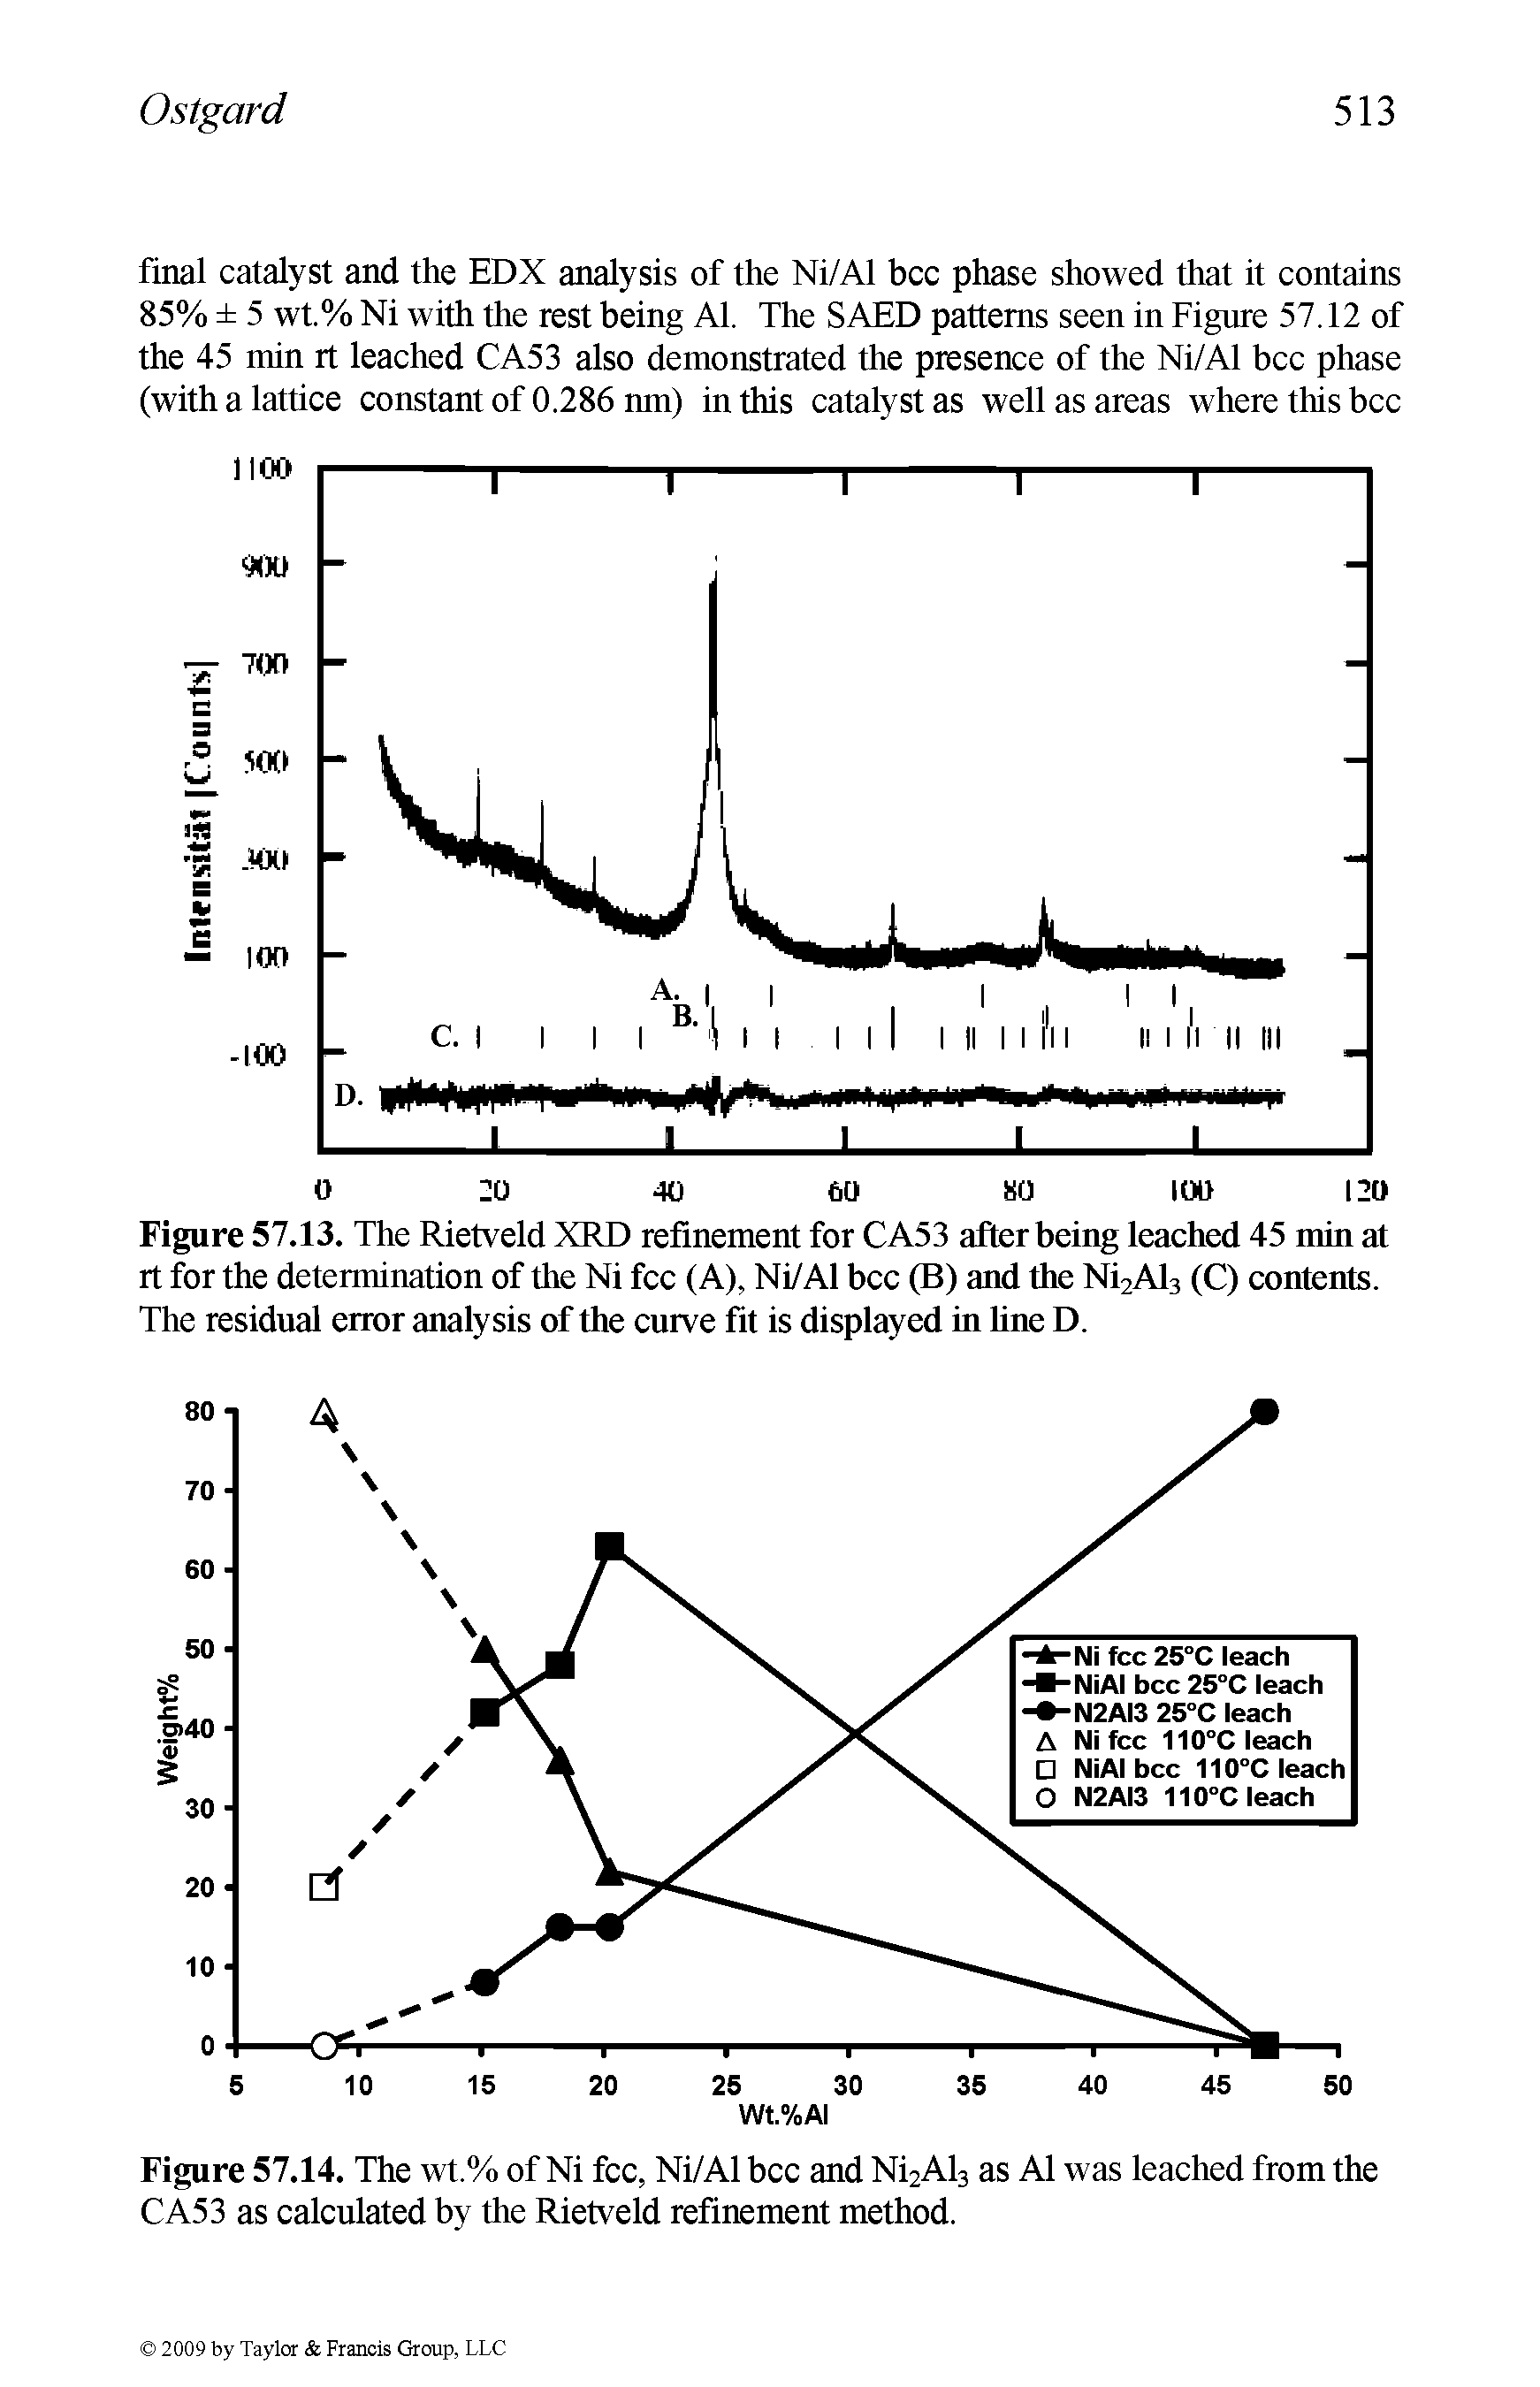 Figure 57.14. The wt.% of Ni fee, Ni/Al bcc and Ni2Al3 as Al was leached from the CA53 as calculated by the Rietveld refinement method.